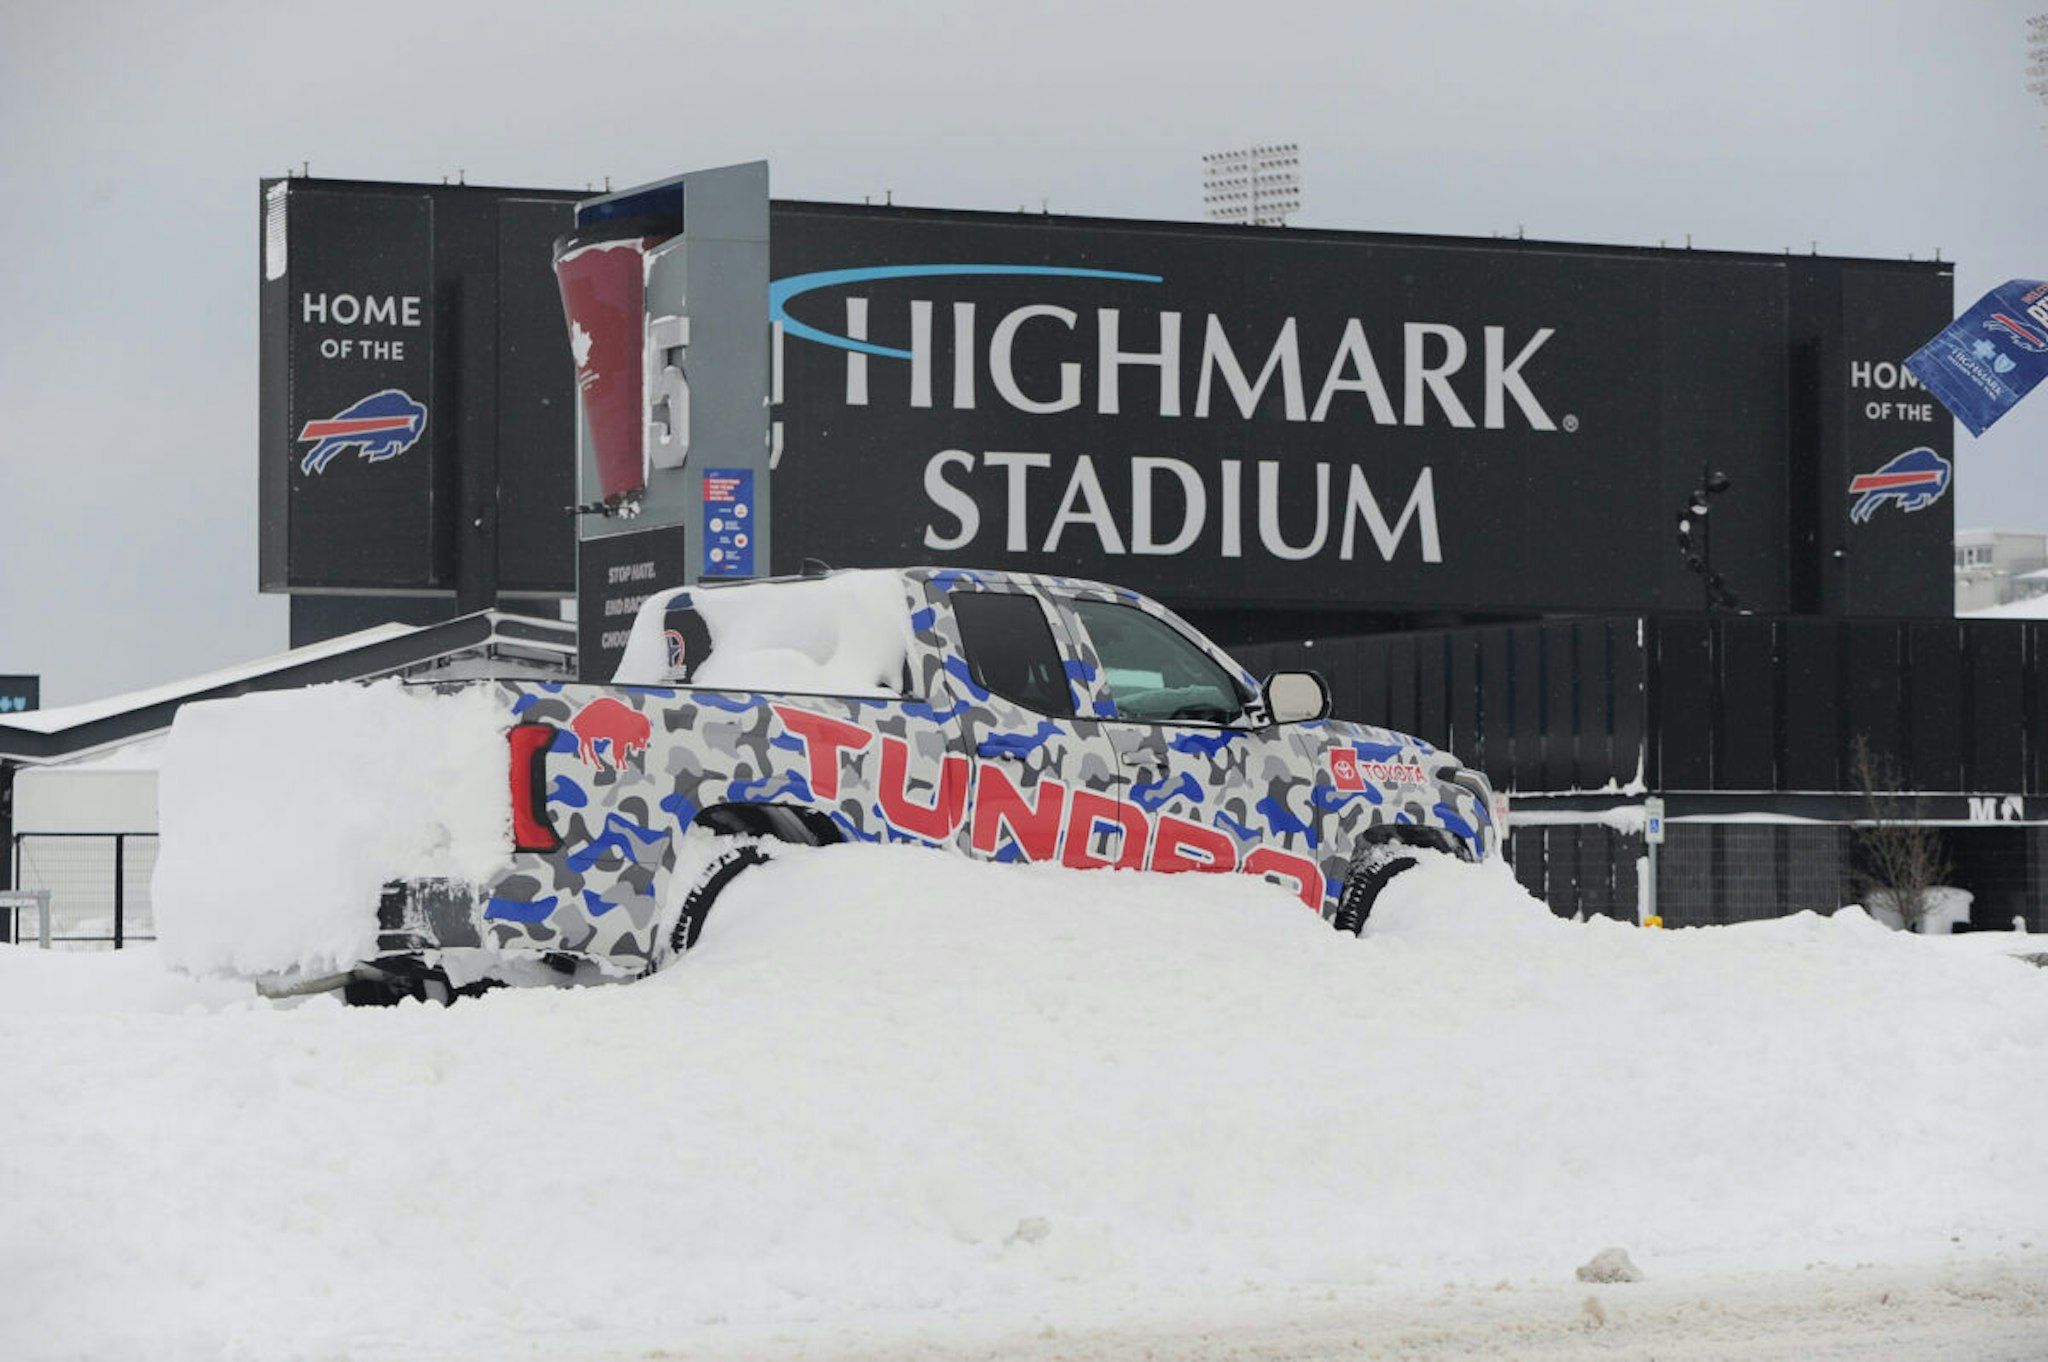 Highmark Stadium, home of the Buffalo Bills, is surrounded by snow as seen from Abbott Road on December 26, 2022 in Orchard Park, New York